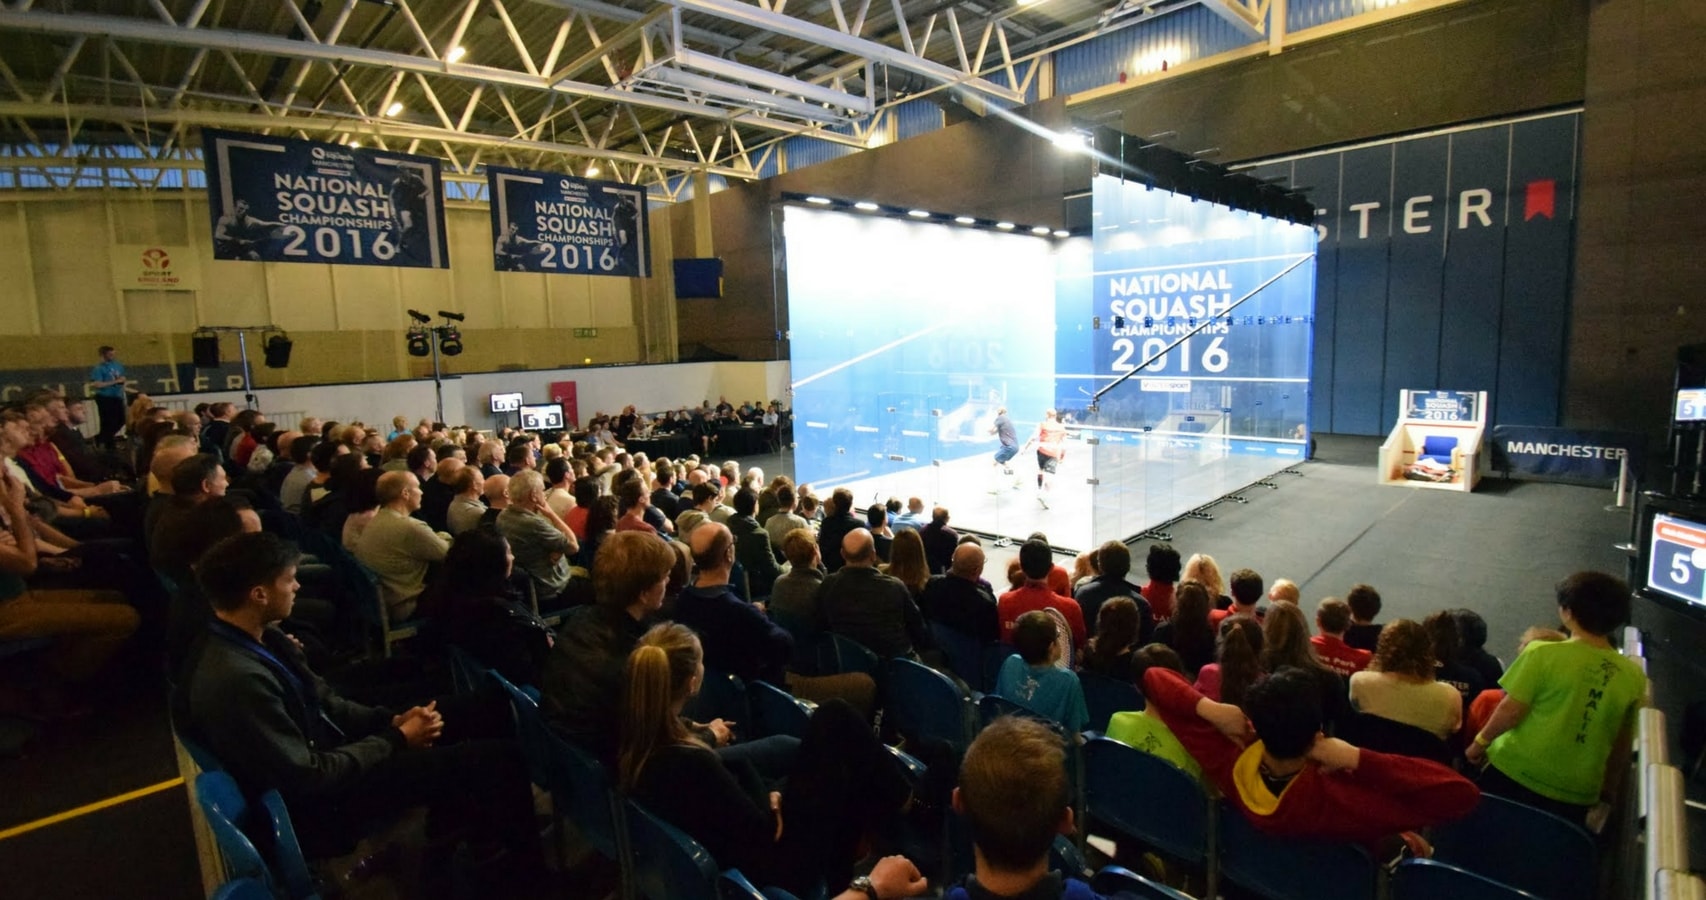 The finals and semis of the Blowers Jewellers National Squash Championships will be streamed live viz YouTube